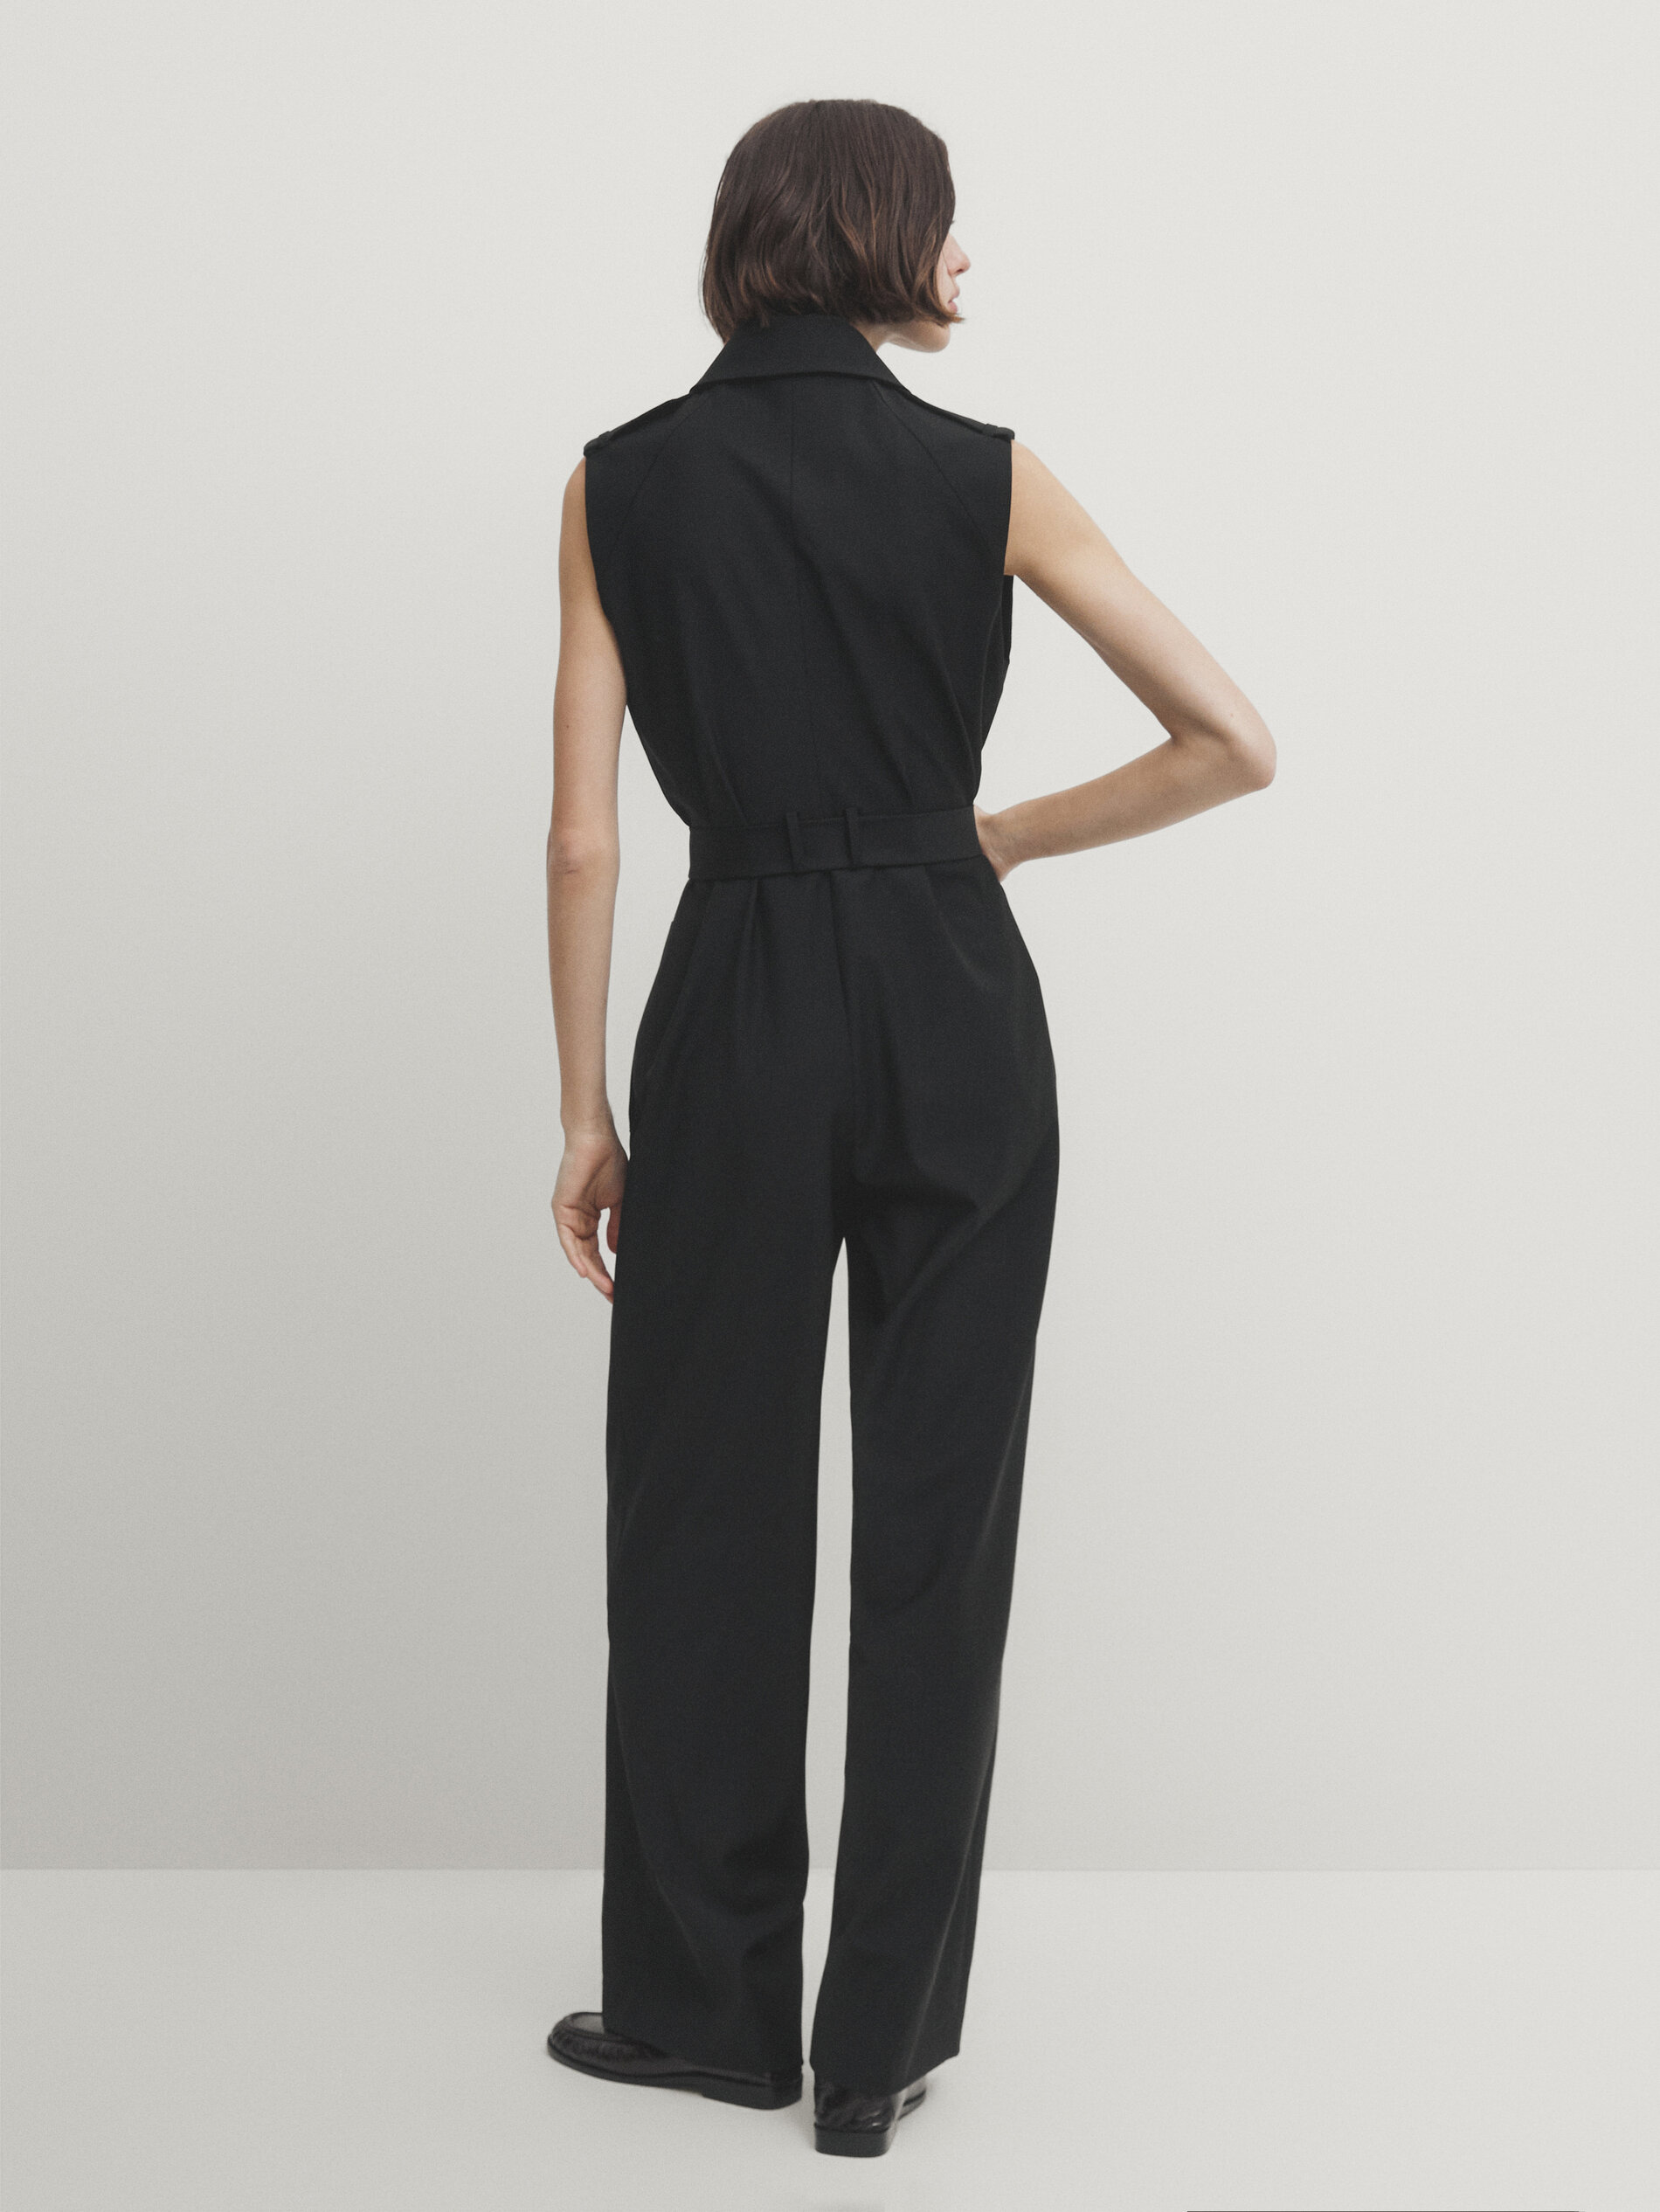 KAMPALA jumpsuit by kfyclothing - Jumpsuits & Overalls - Afrikrea